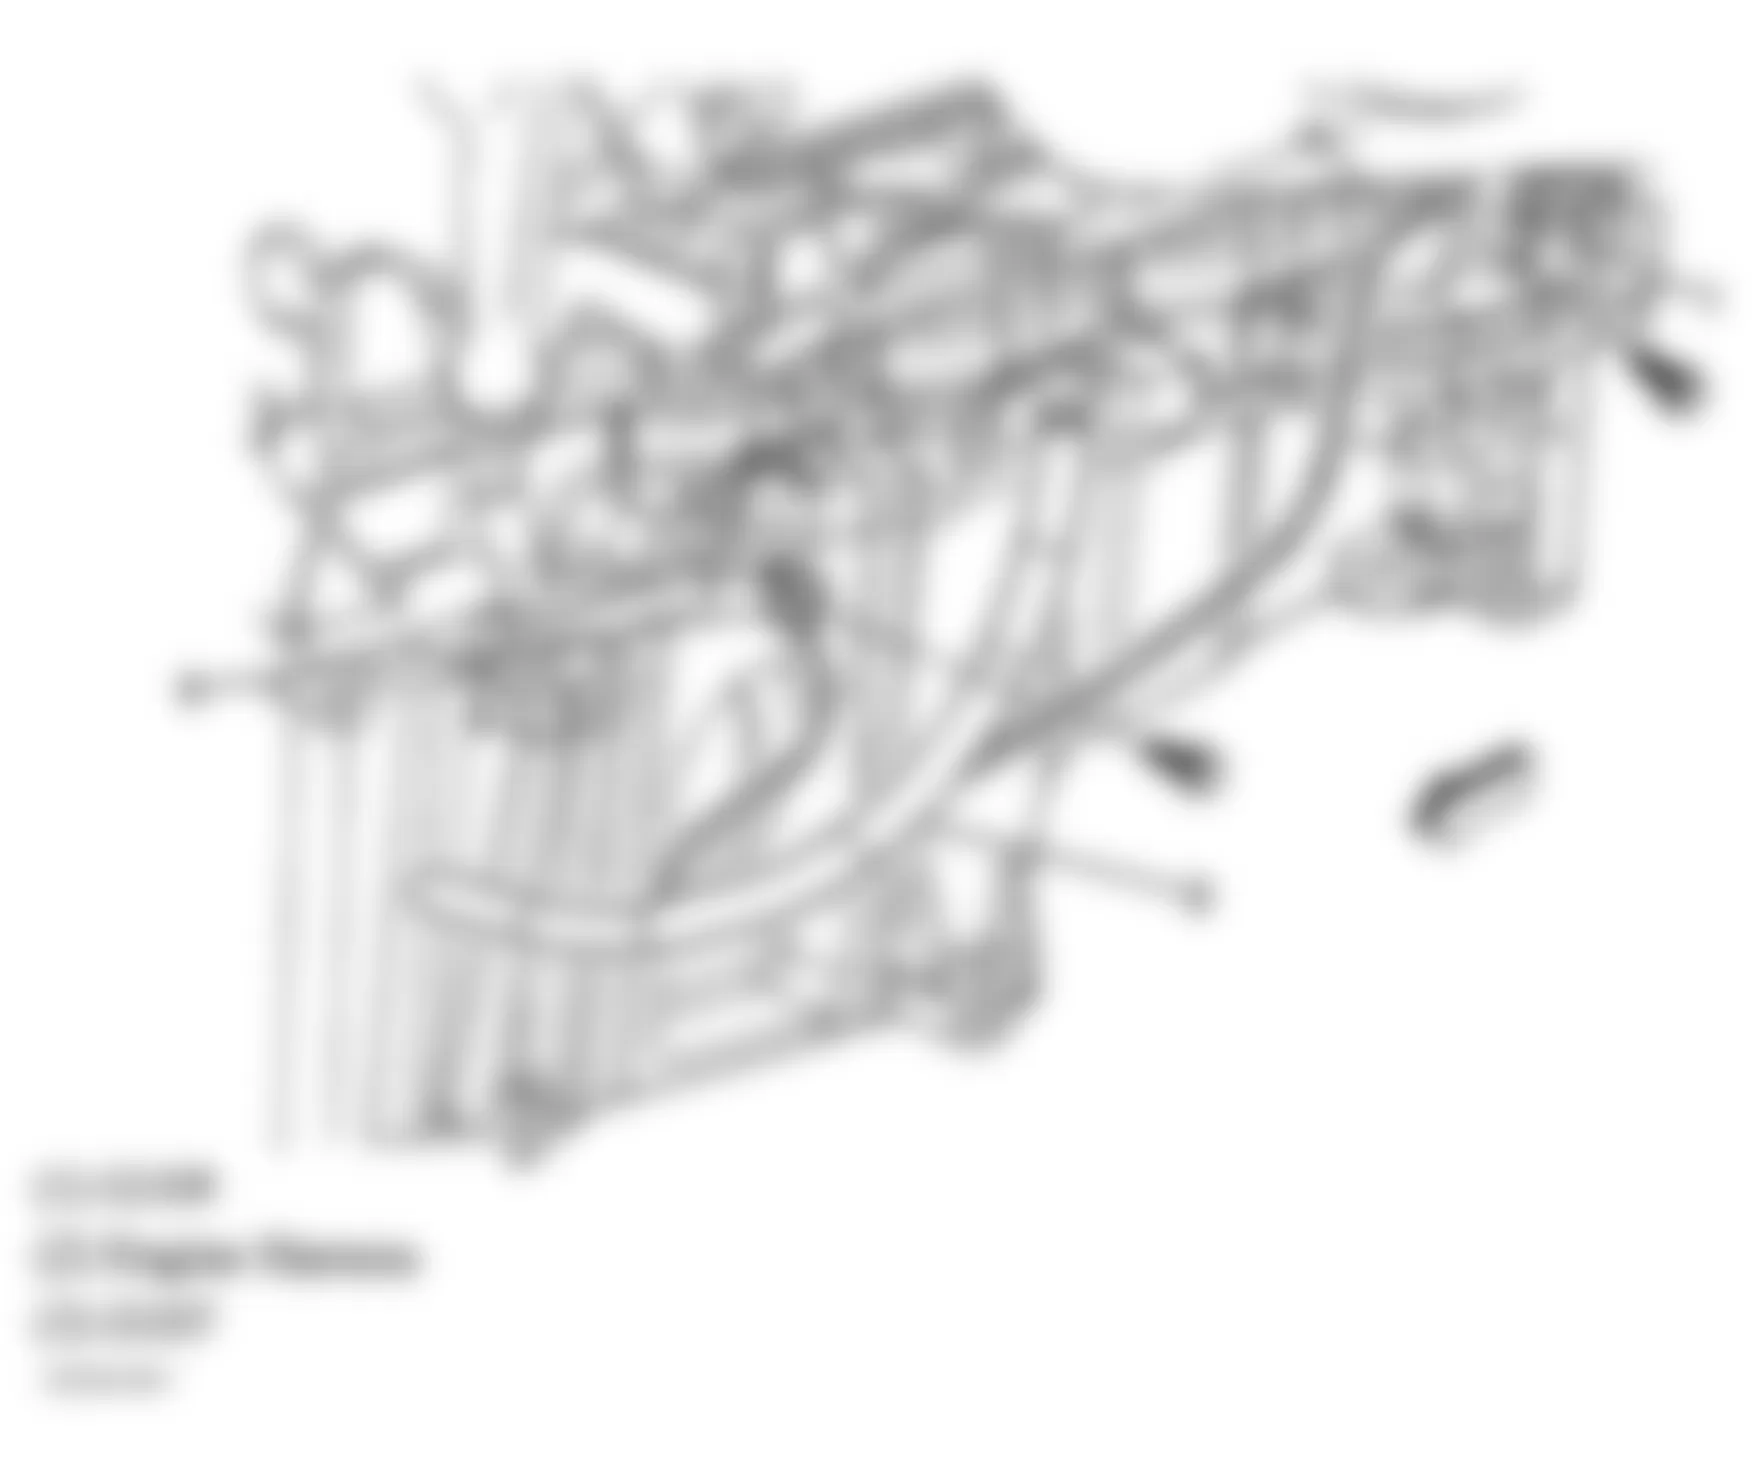 GMC Envoy XUV 2004 - Component Locations -  Left Side Of Engine (5.3L)